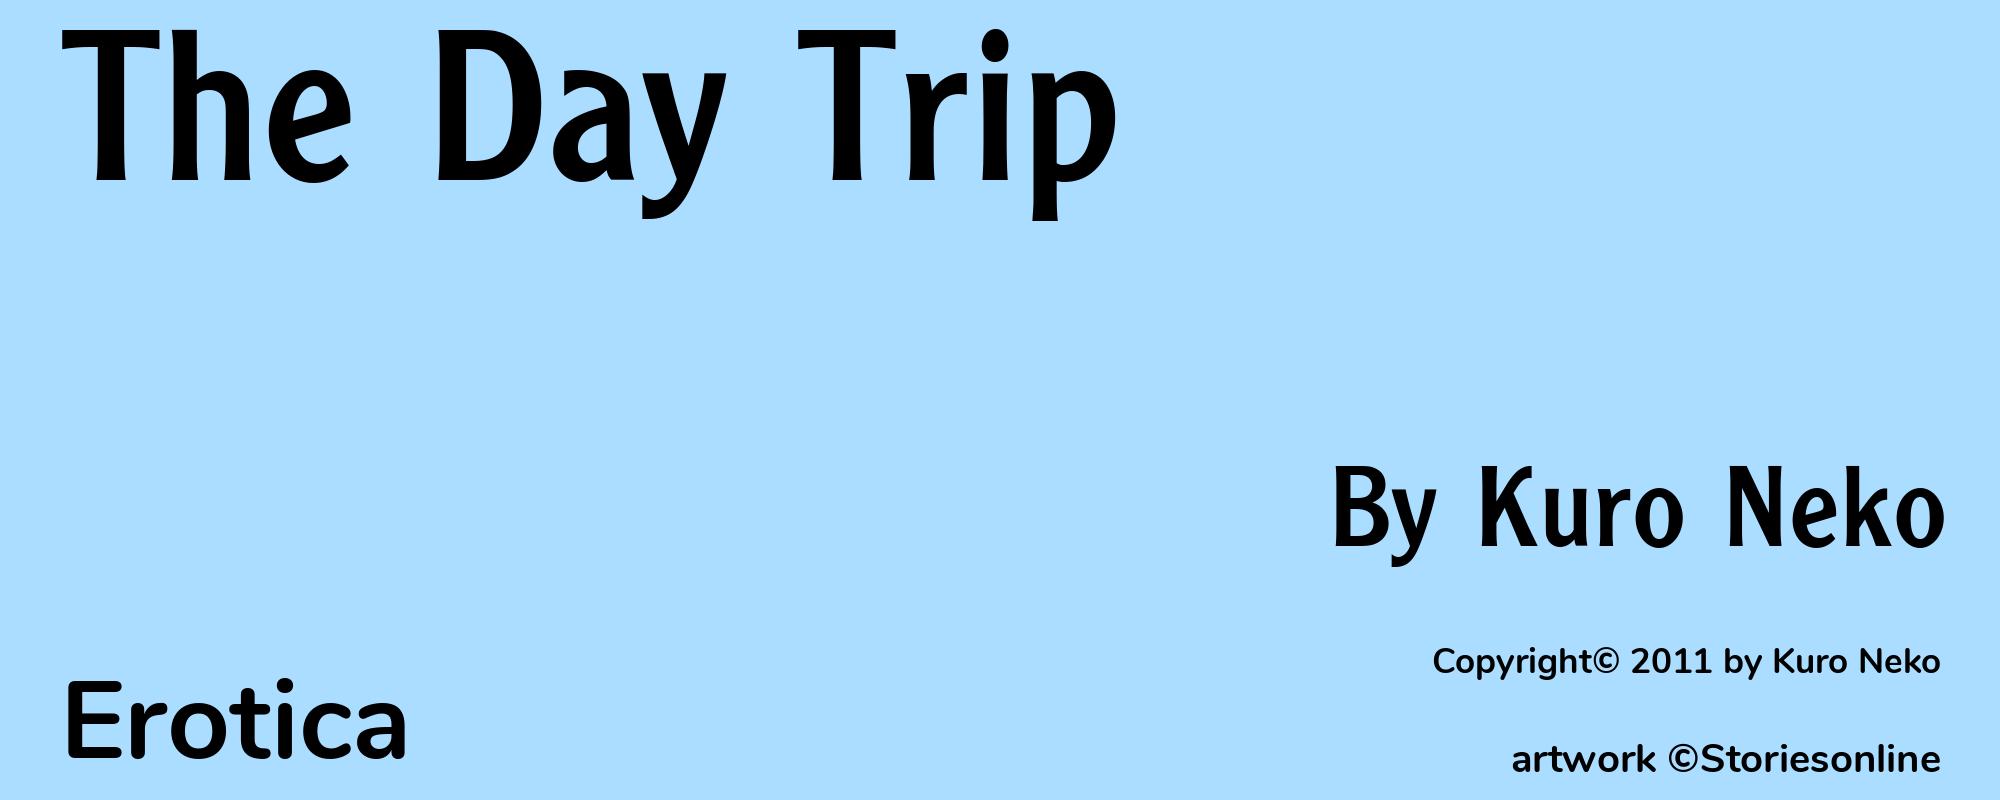 The Day Trip - Cover